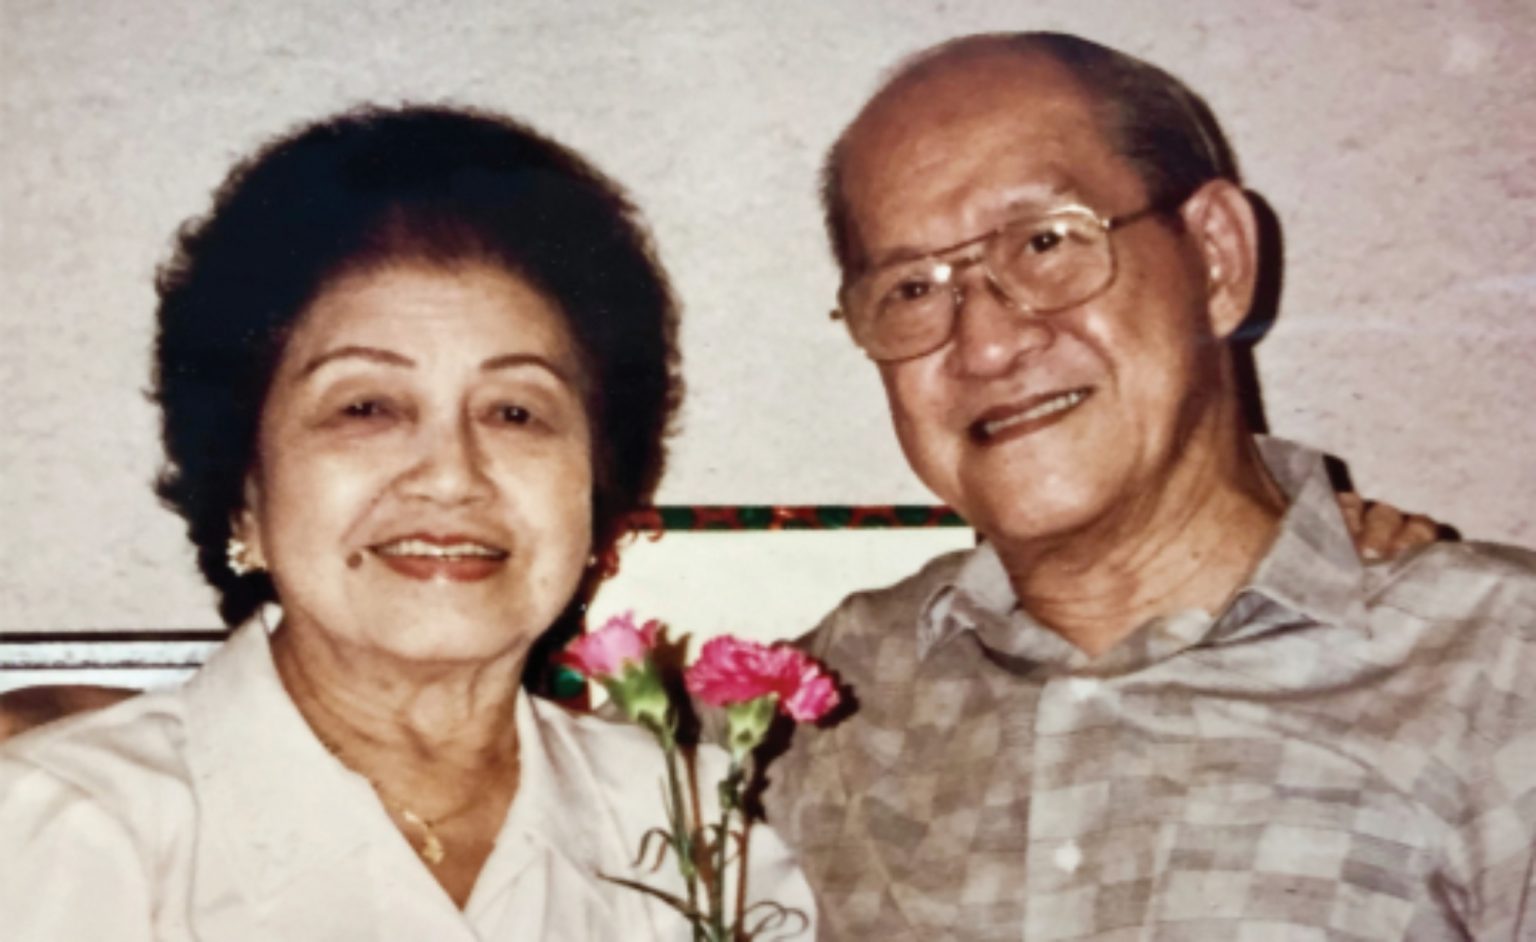 An older couple smiling while posing for a photo, holding a flower in their hands, radiating love and happiness.